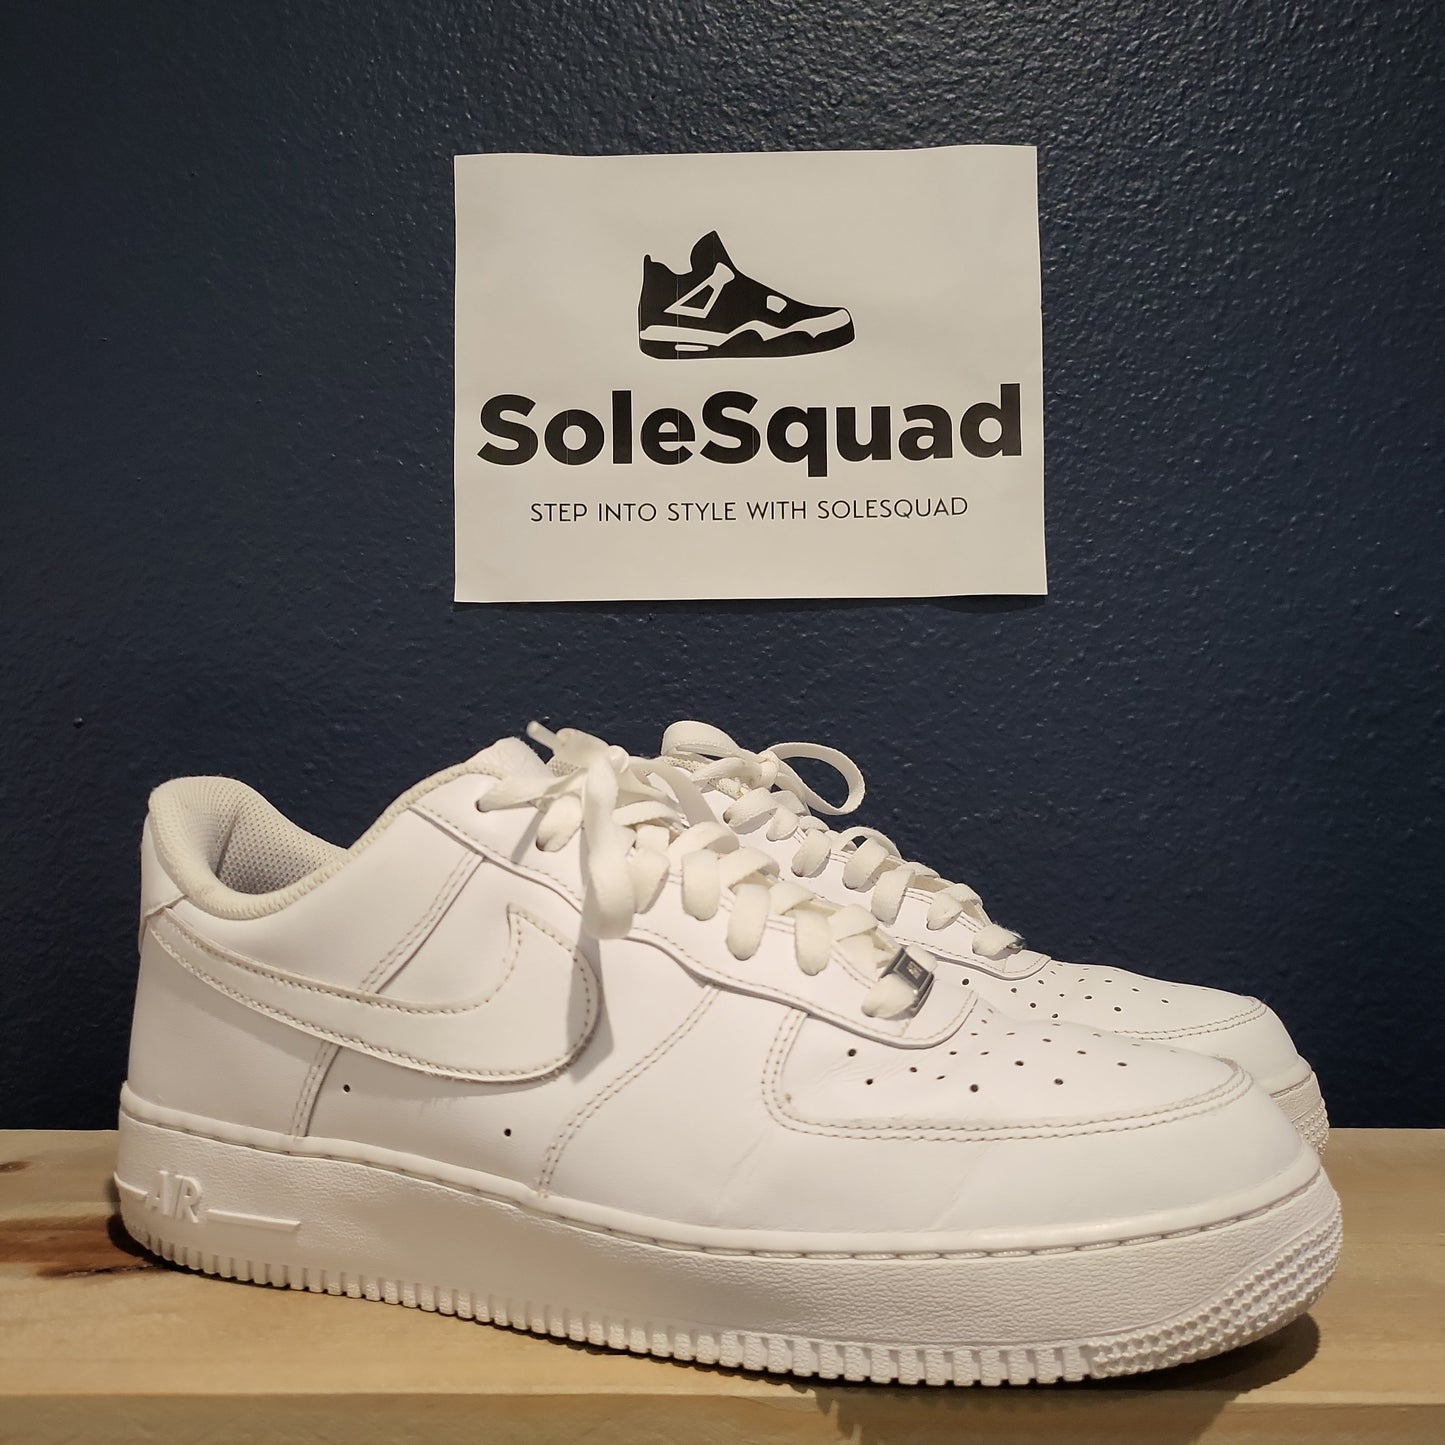 Air Force One white size 12 used